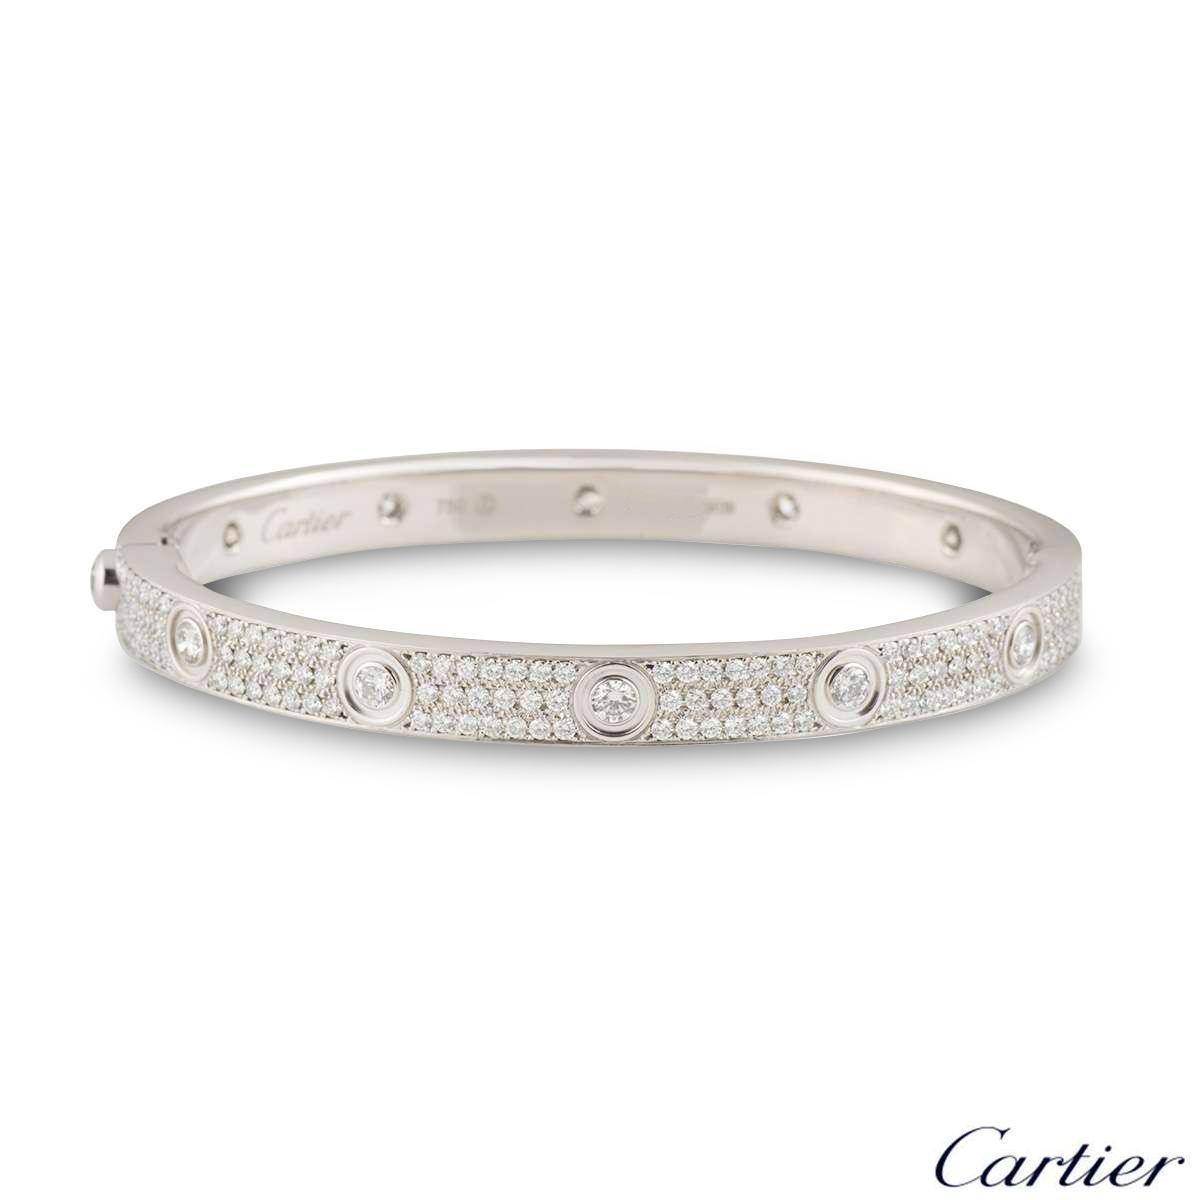 A sparkly 18k white gold Cartier diamond bracelet from the Love collection. The bracelet has the 10 round brilliant cut diamonds around the outer edge in a rubover setting with 204 round brilliant cut diamonds pave set between each screw motif. The